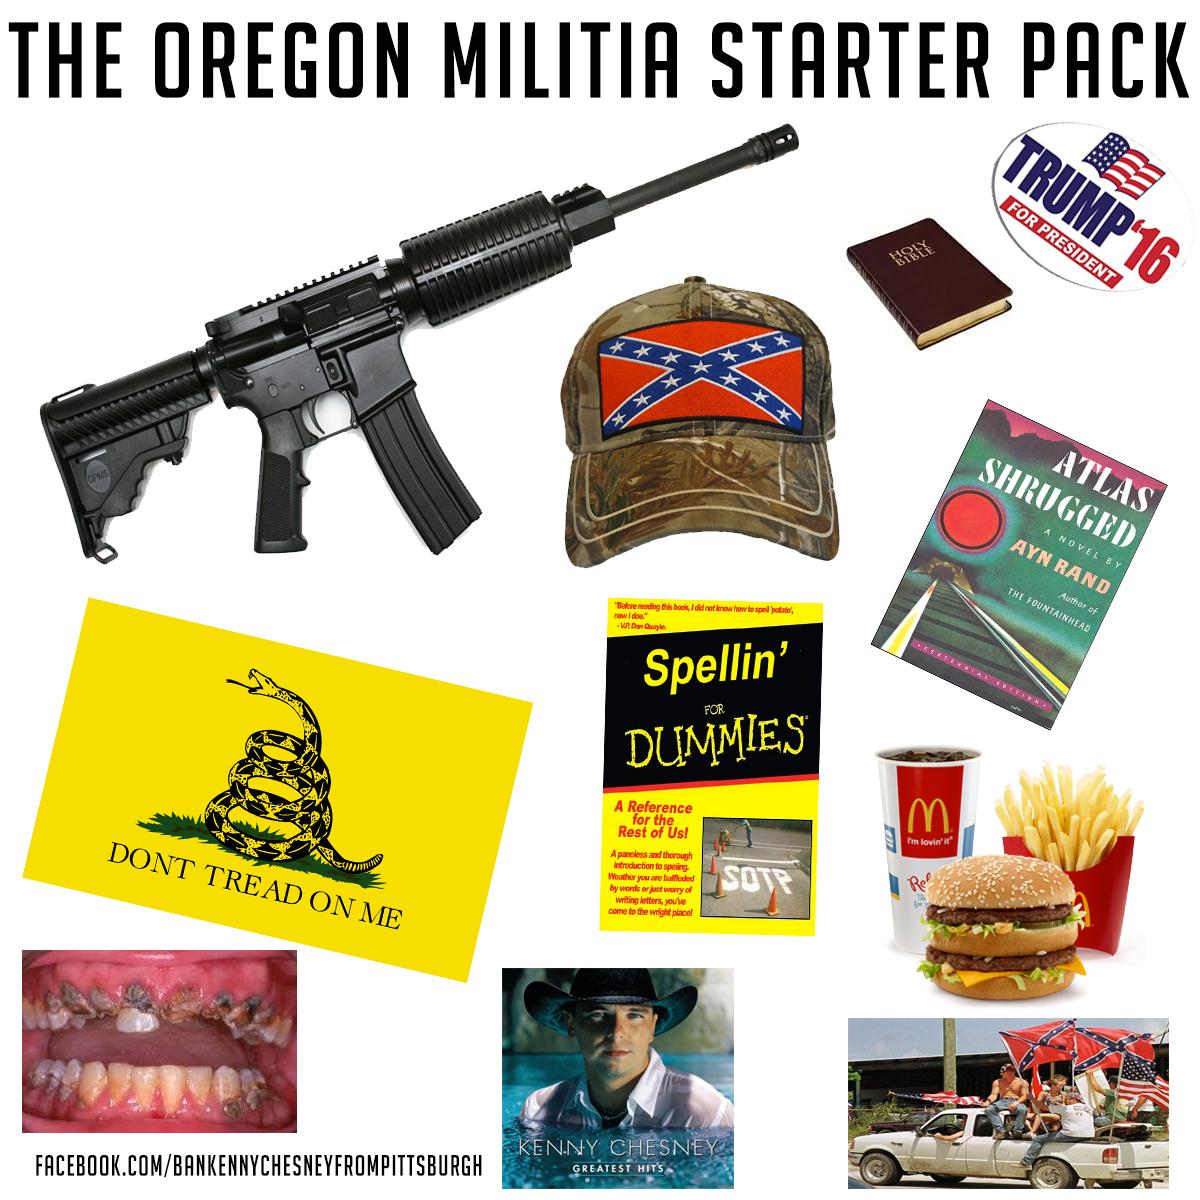 Hilarious Starter Packs That Are Spot-On